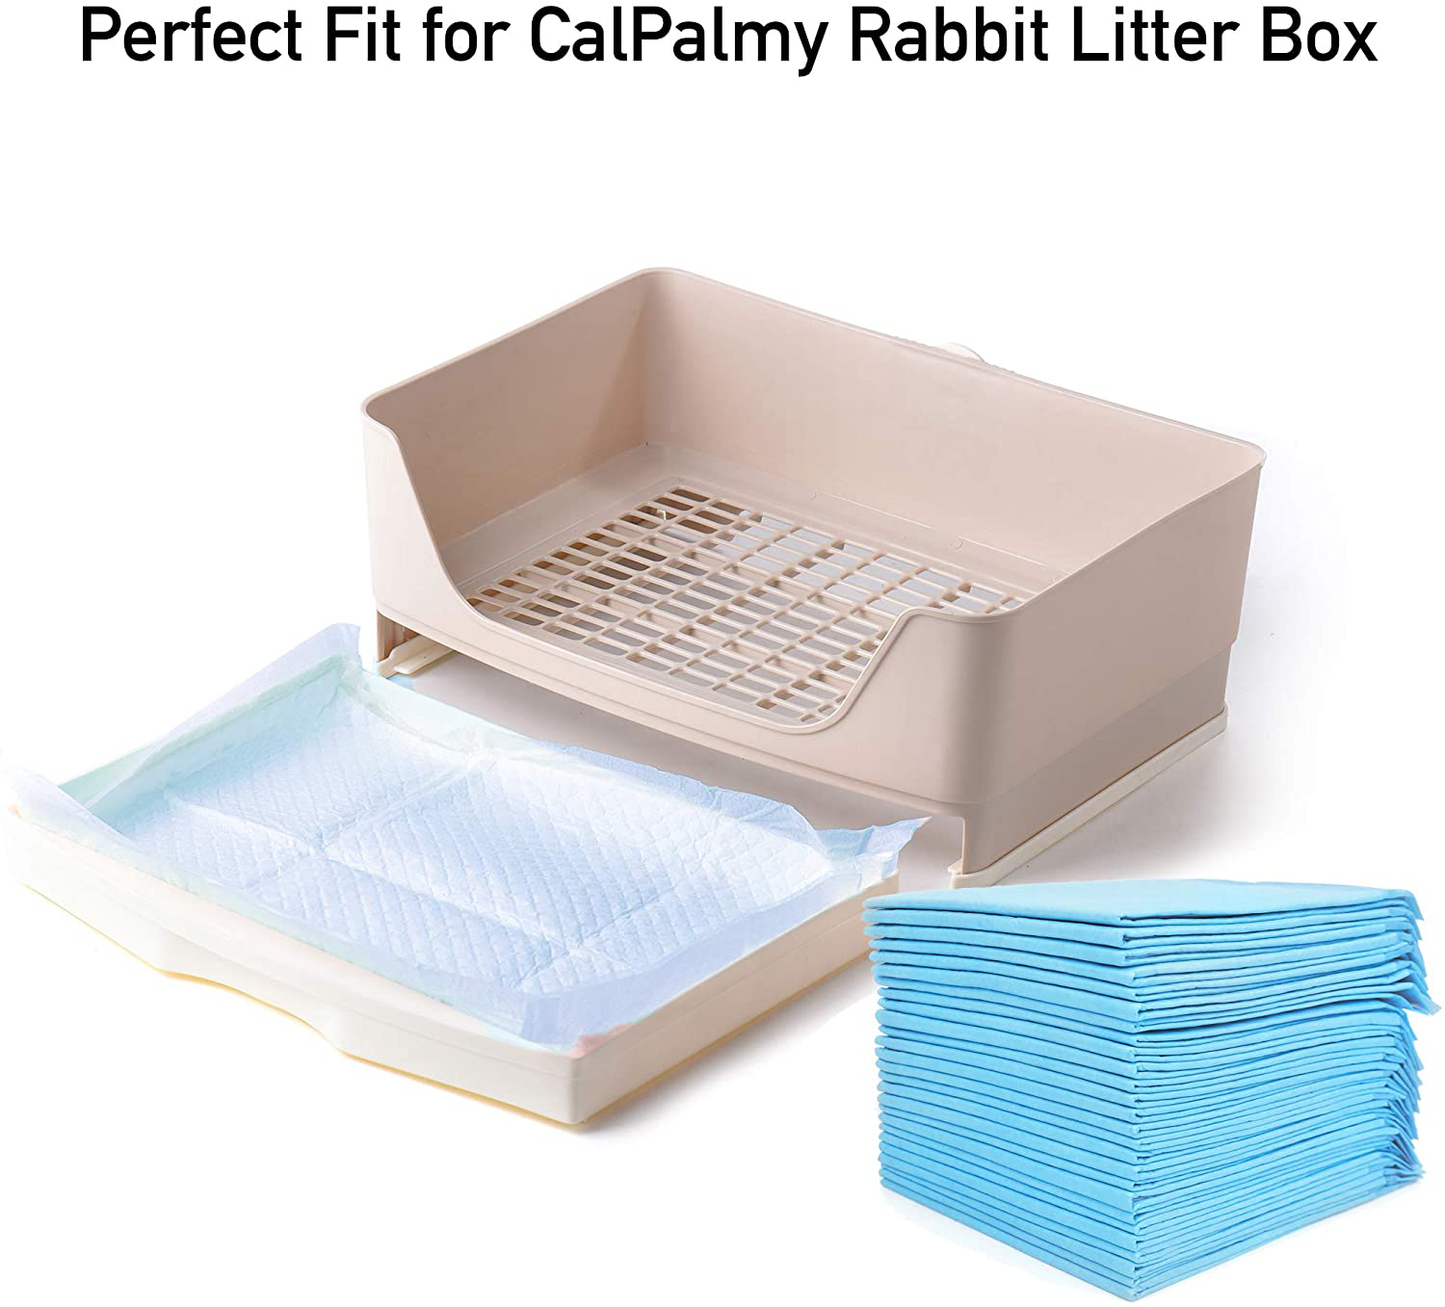 CALPALMY (100 Pads) Ultra Absorbency Pet Toilet Training Pads 18" X 13" Moisture Locking Technology Turns Liquid into Gel - Perfect for Rabbits and Guinea Pigs